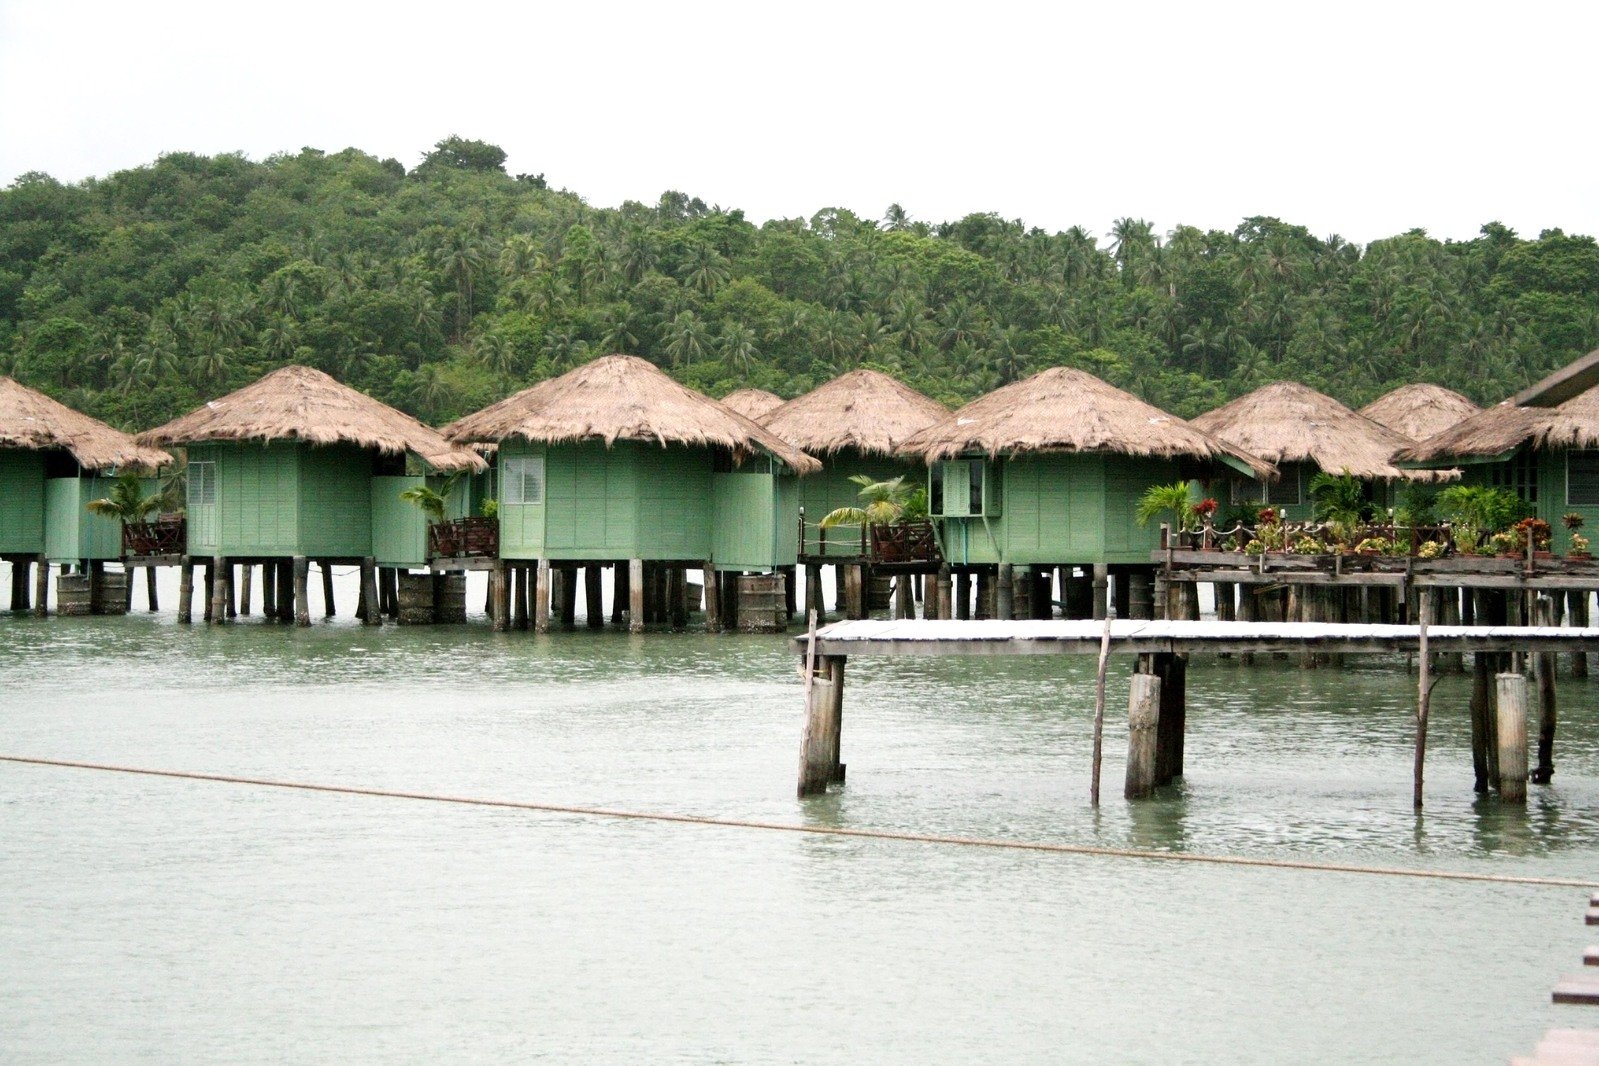 a number of huts on stilts near water